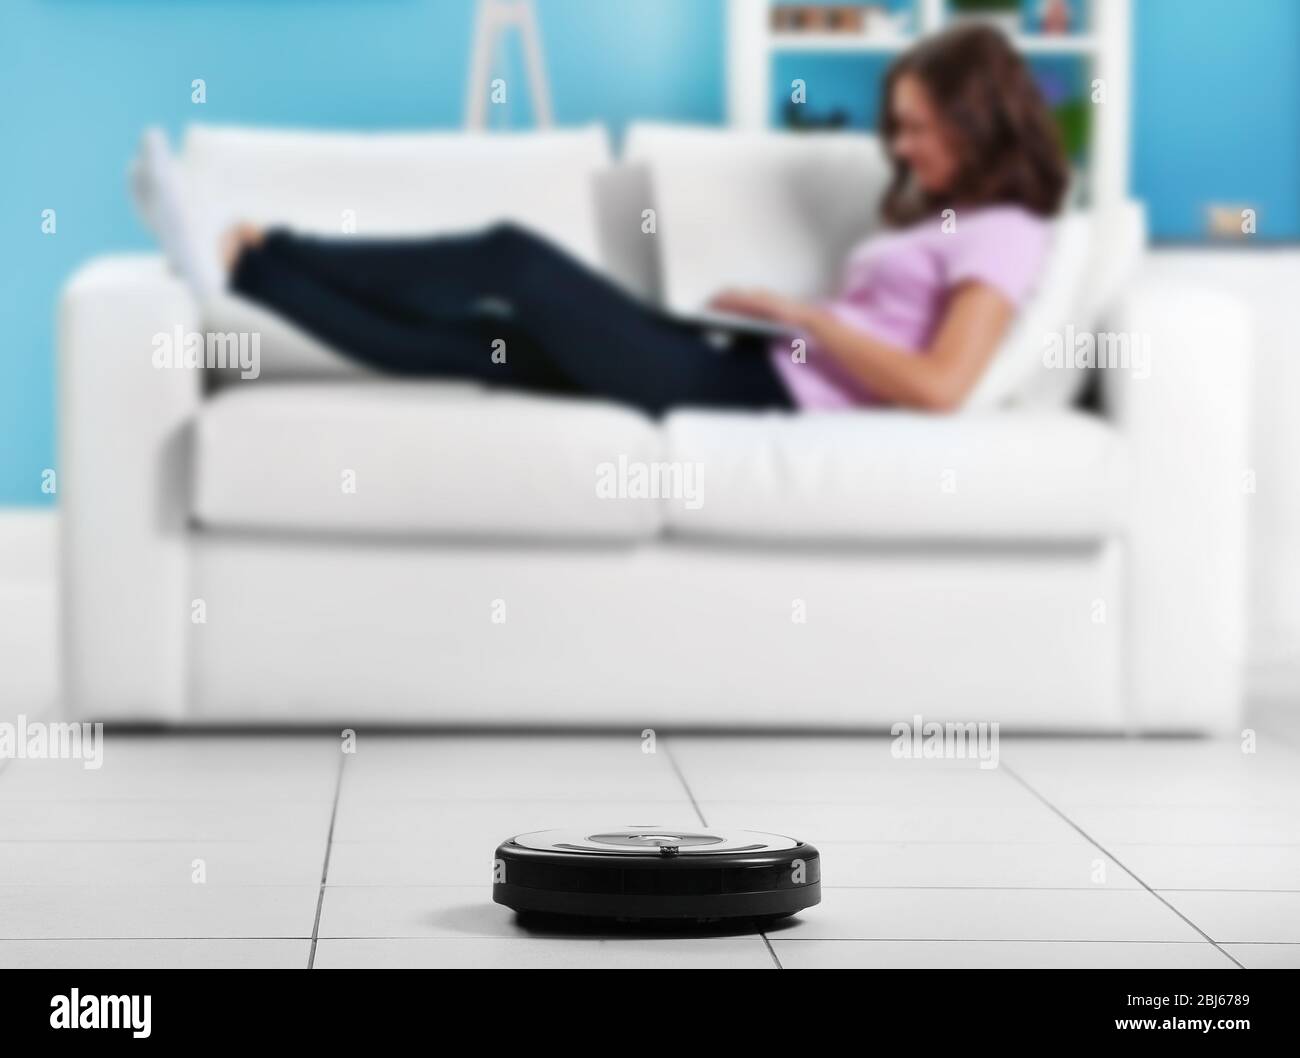 Cleaning concept - automatic robotic hoover clean the room while woman relaxing with laptop, close up Stock Photo